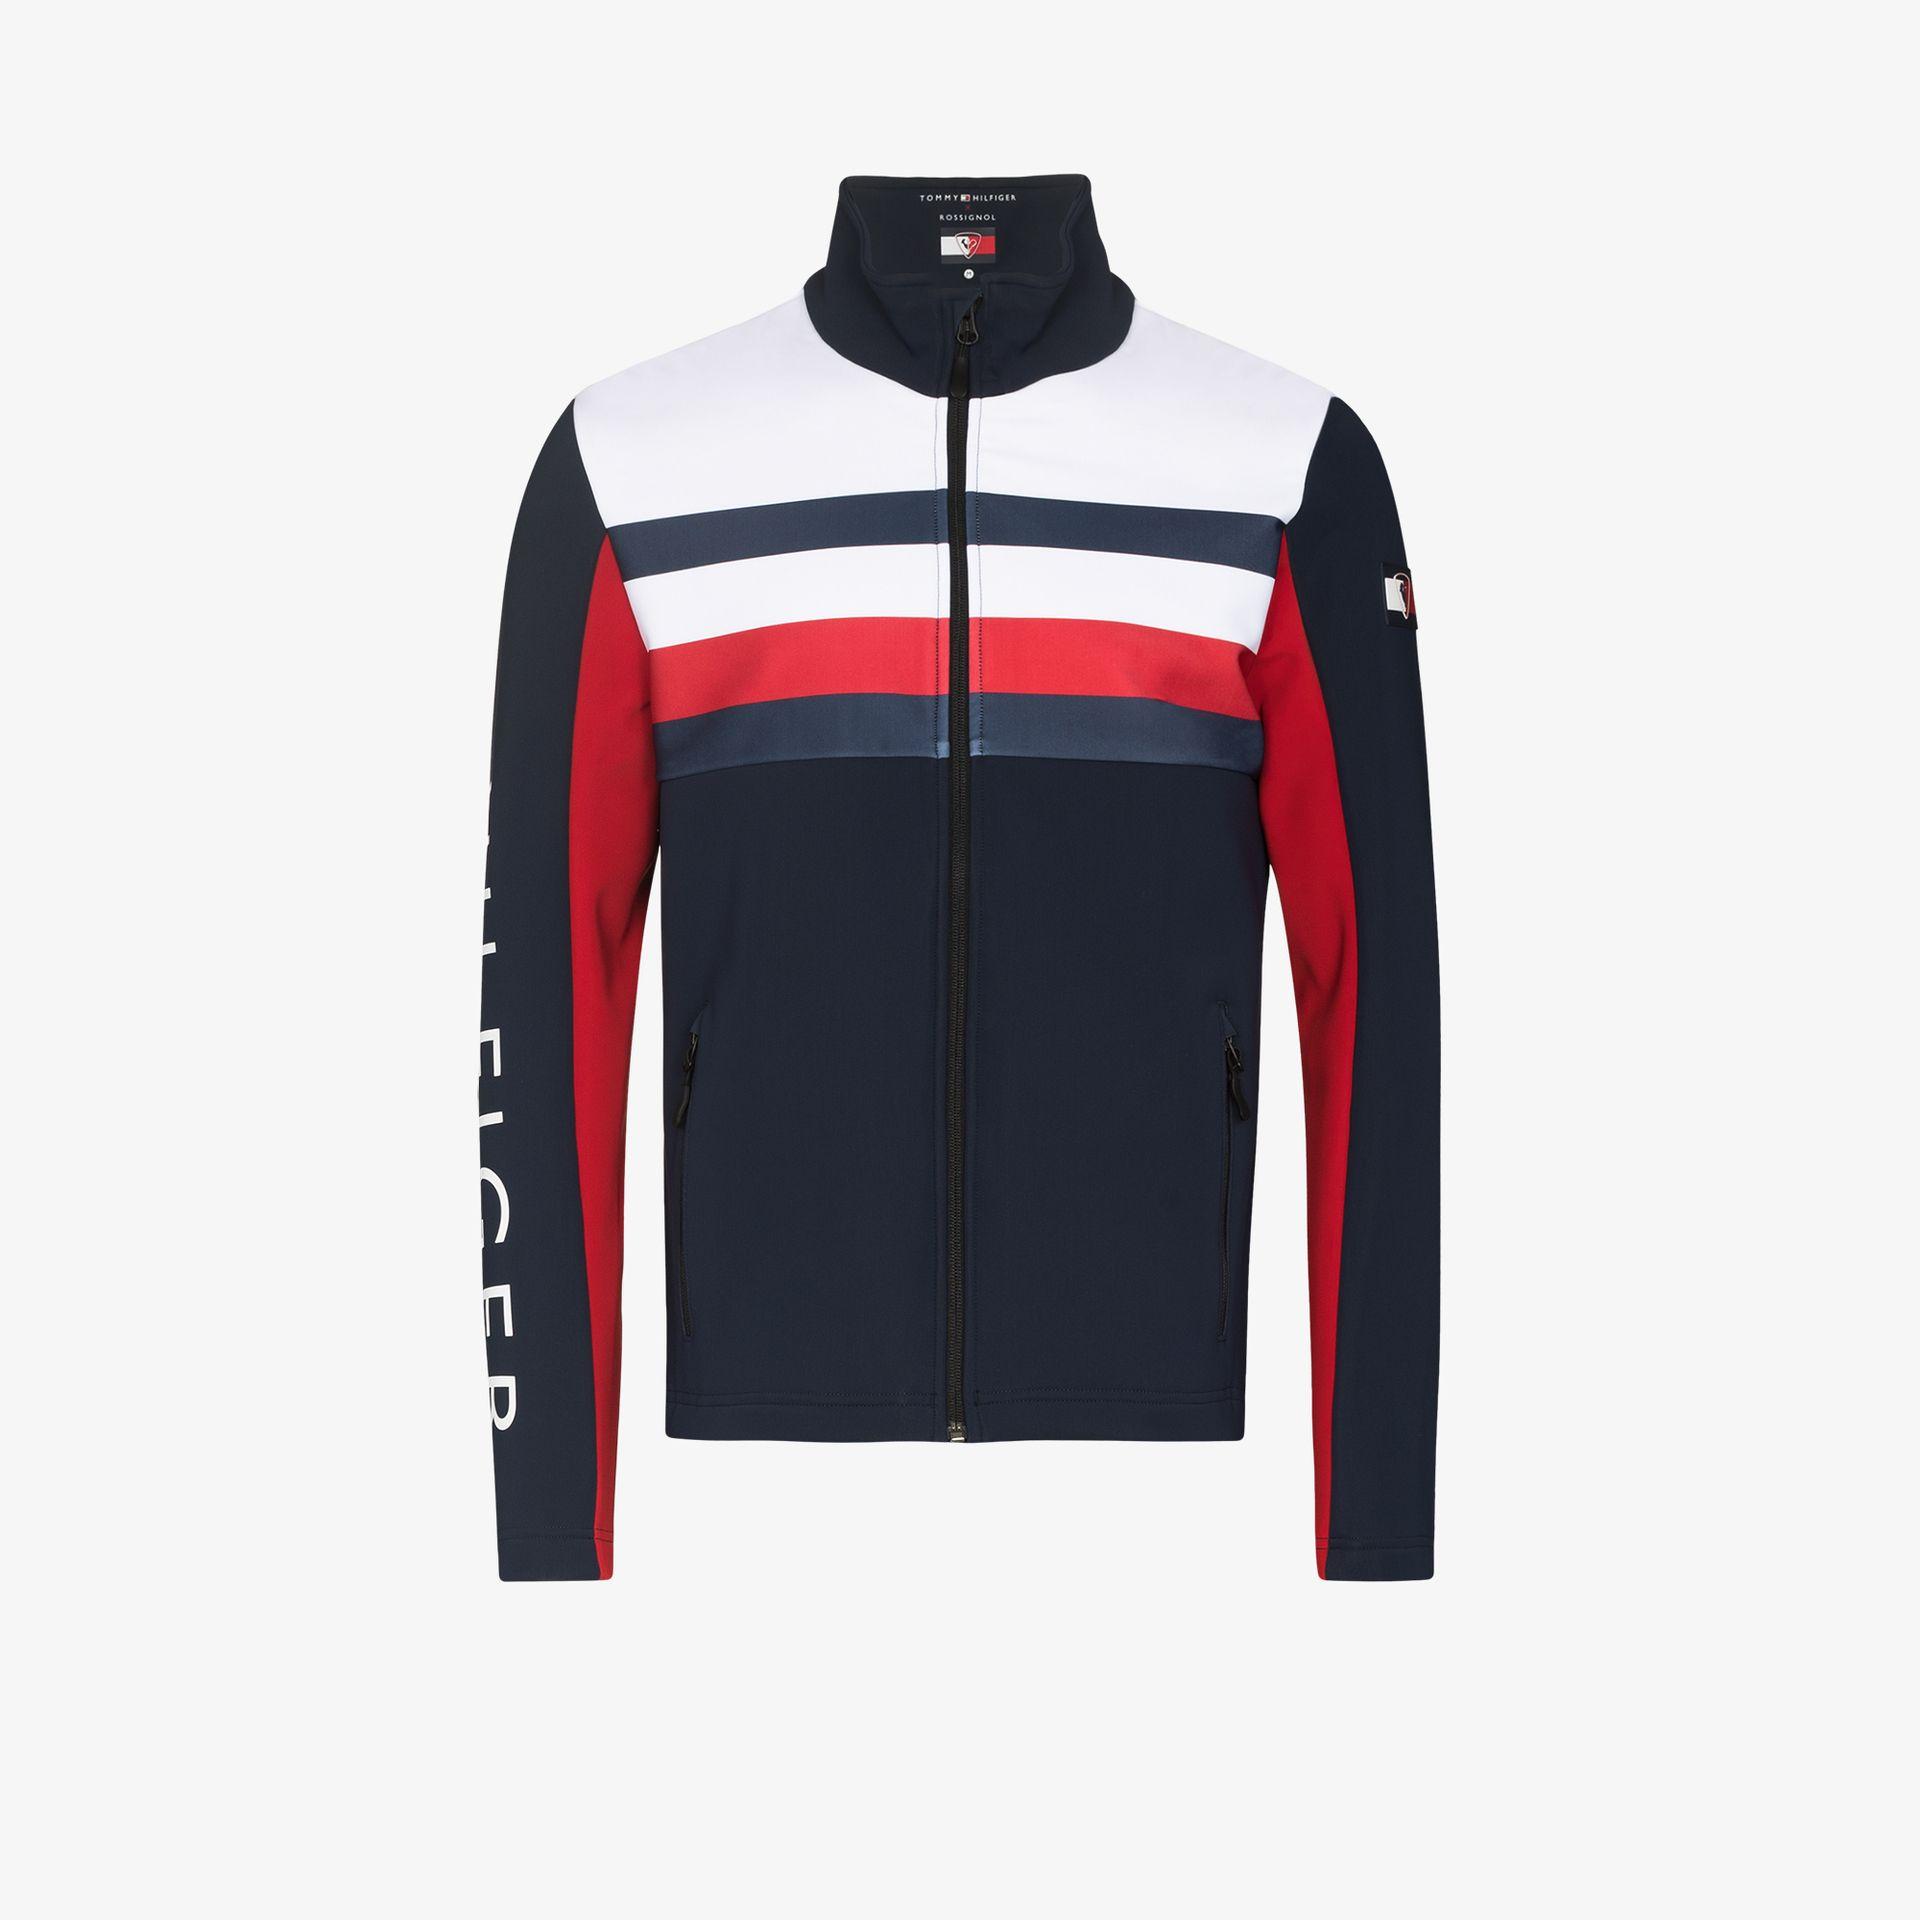 TOMMY HILFIGER Athletic Hooded Jacket - SKY CAPTAIN - TOMMY